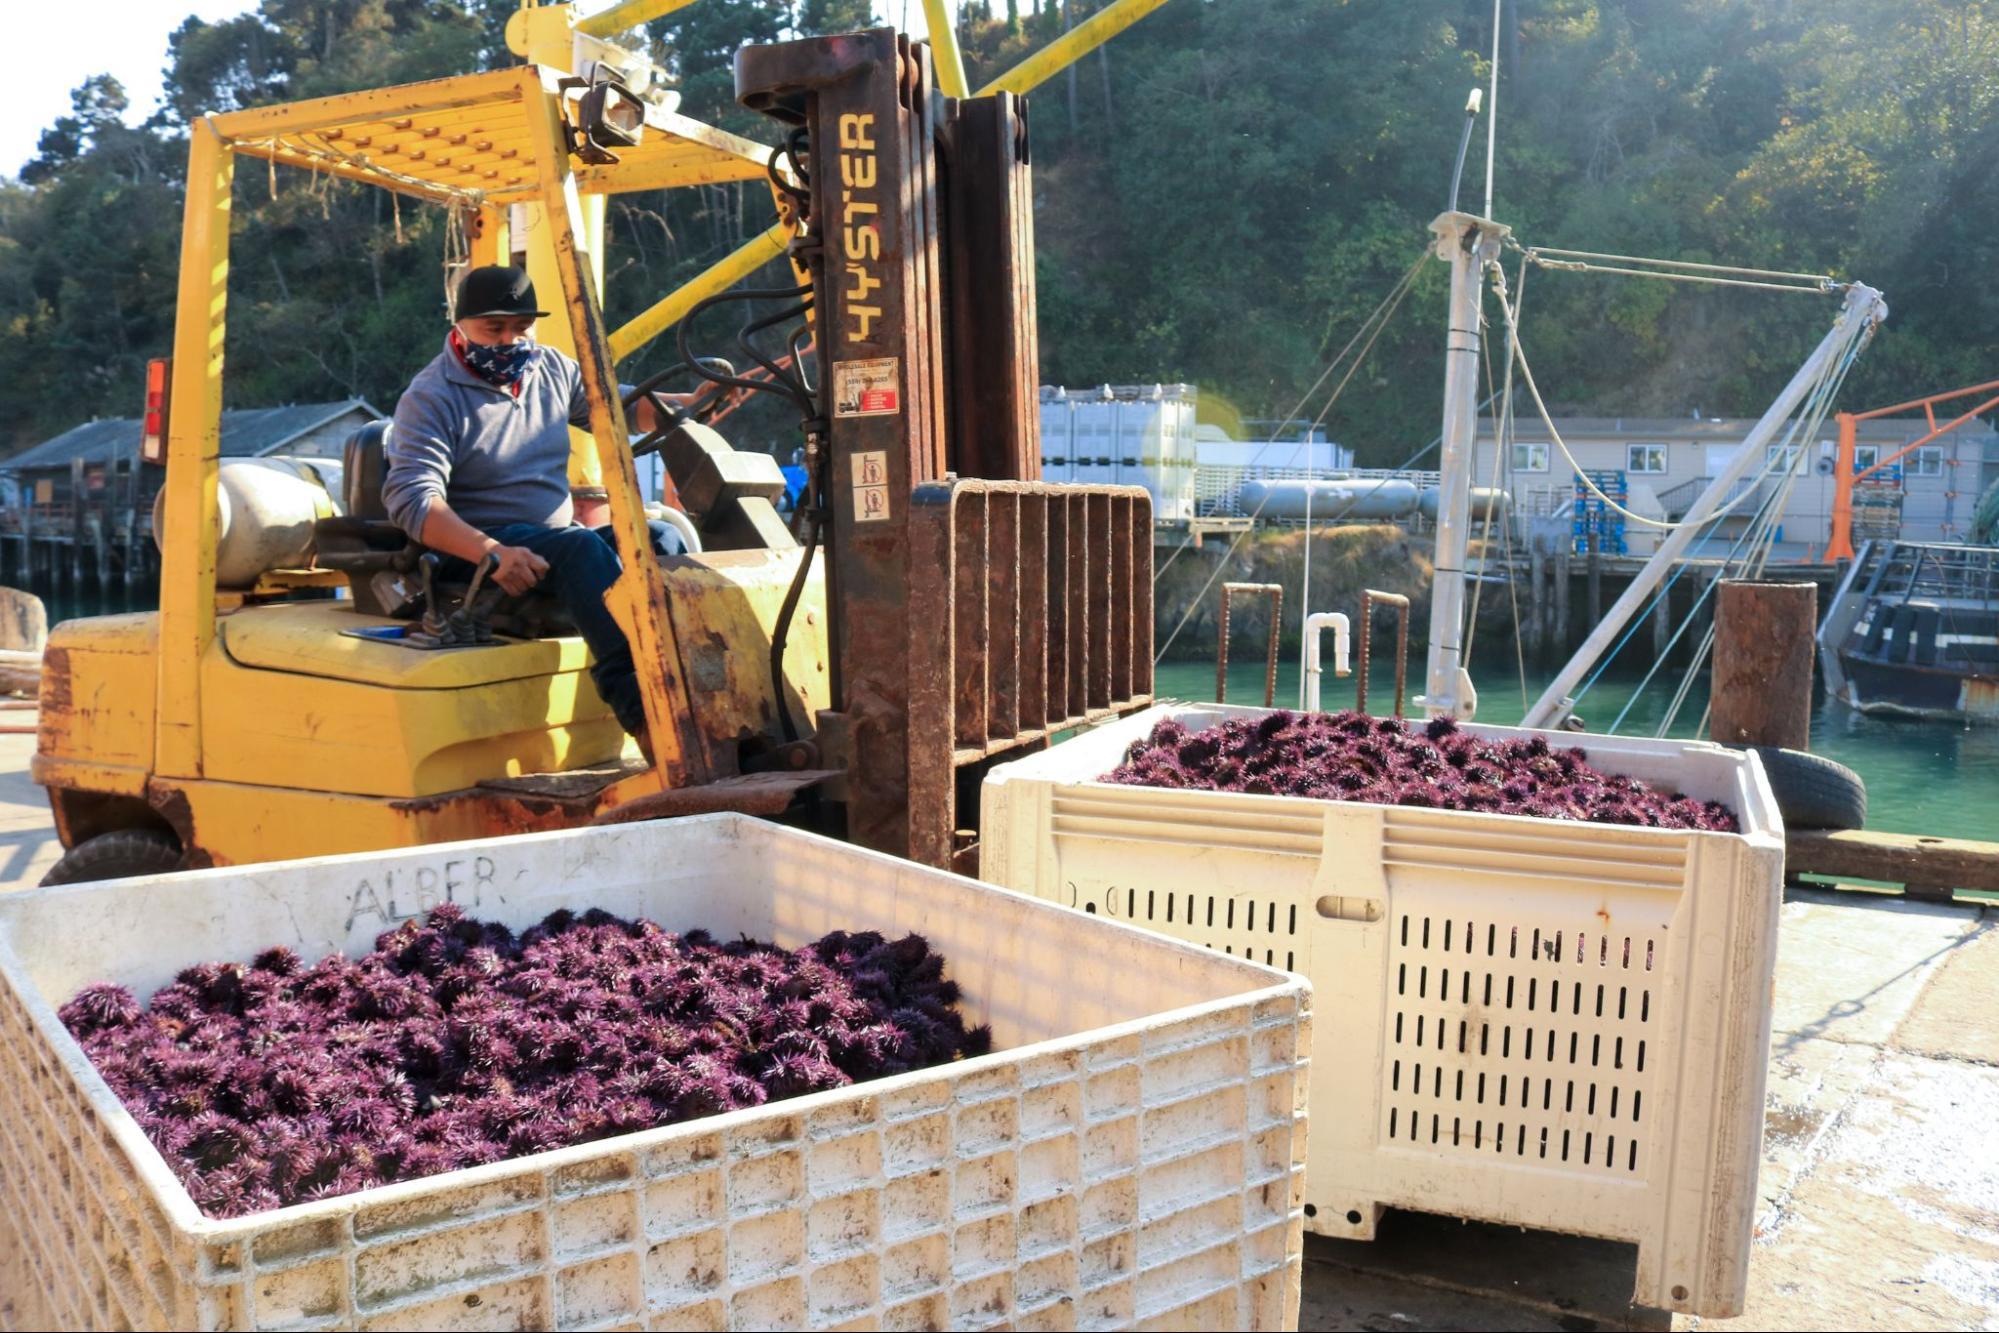 A man in a long-sleeved blue shirt and face bandana drives a yellow forklift with a large, white crate teeming with spiny purple orbs (urchins). Another large crate full or urchins stands in the foreground. In the back, water and docks are visible.